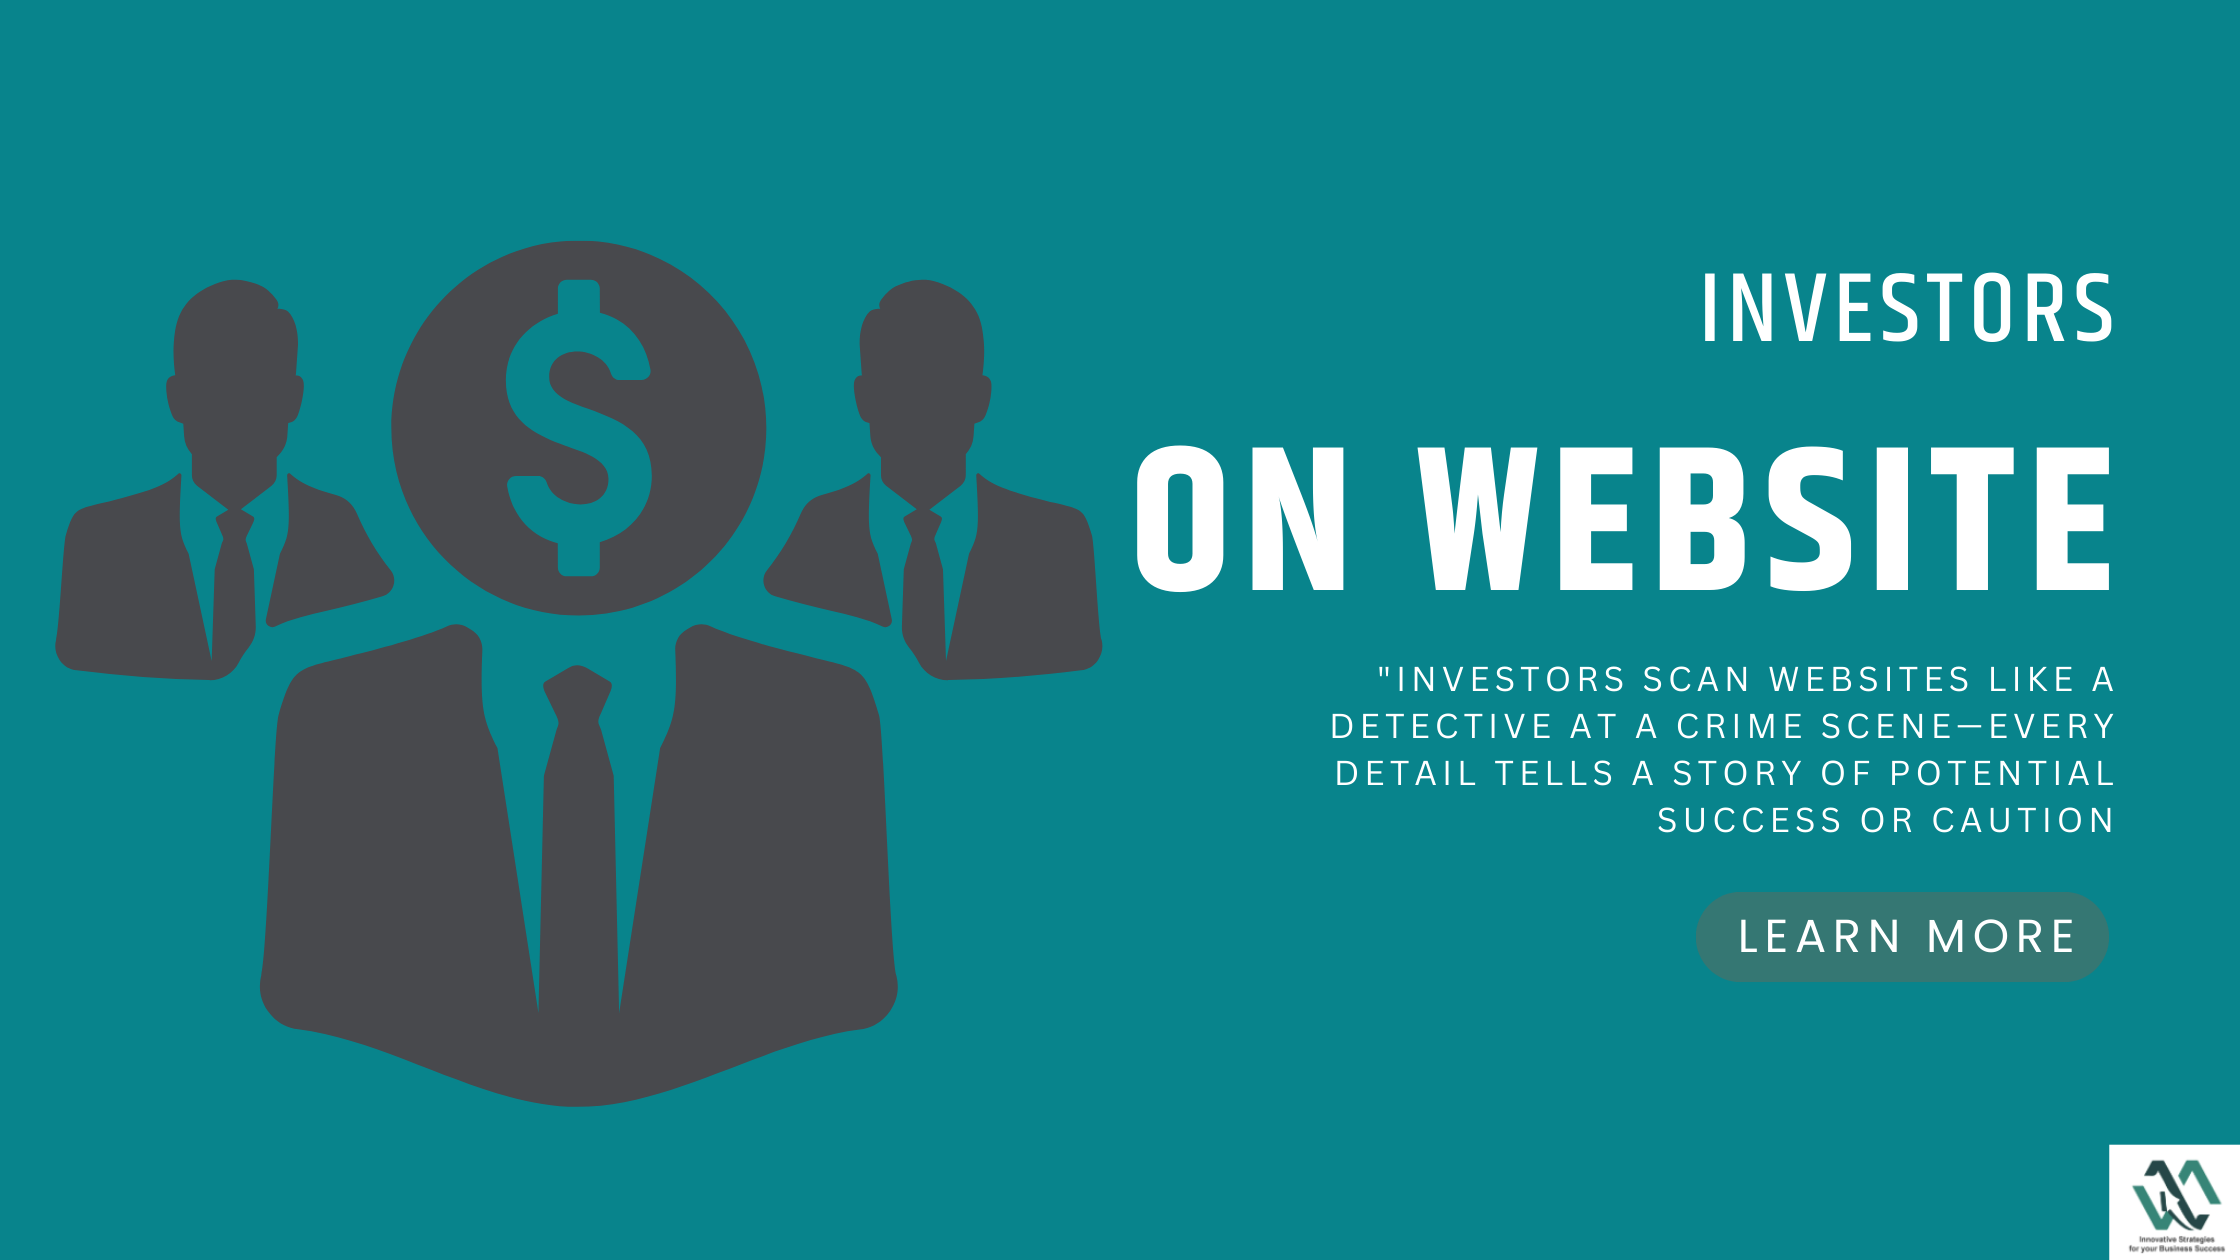 How to attract investors with your website